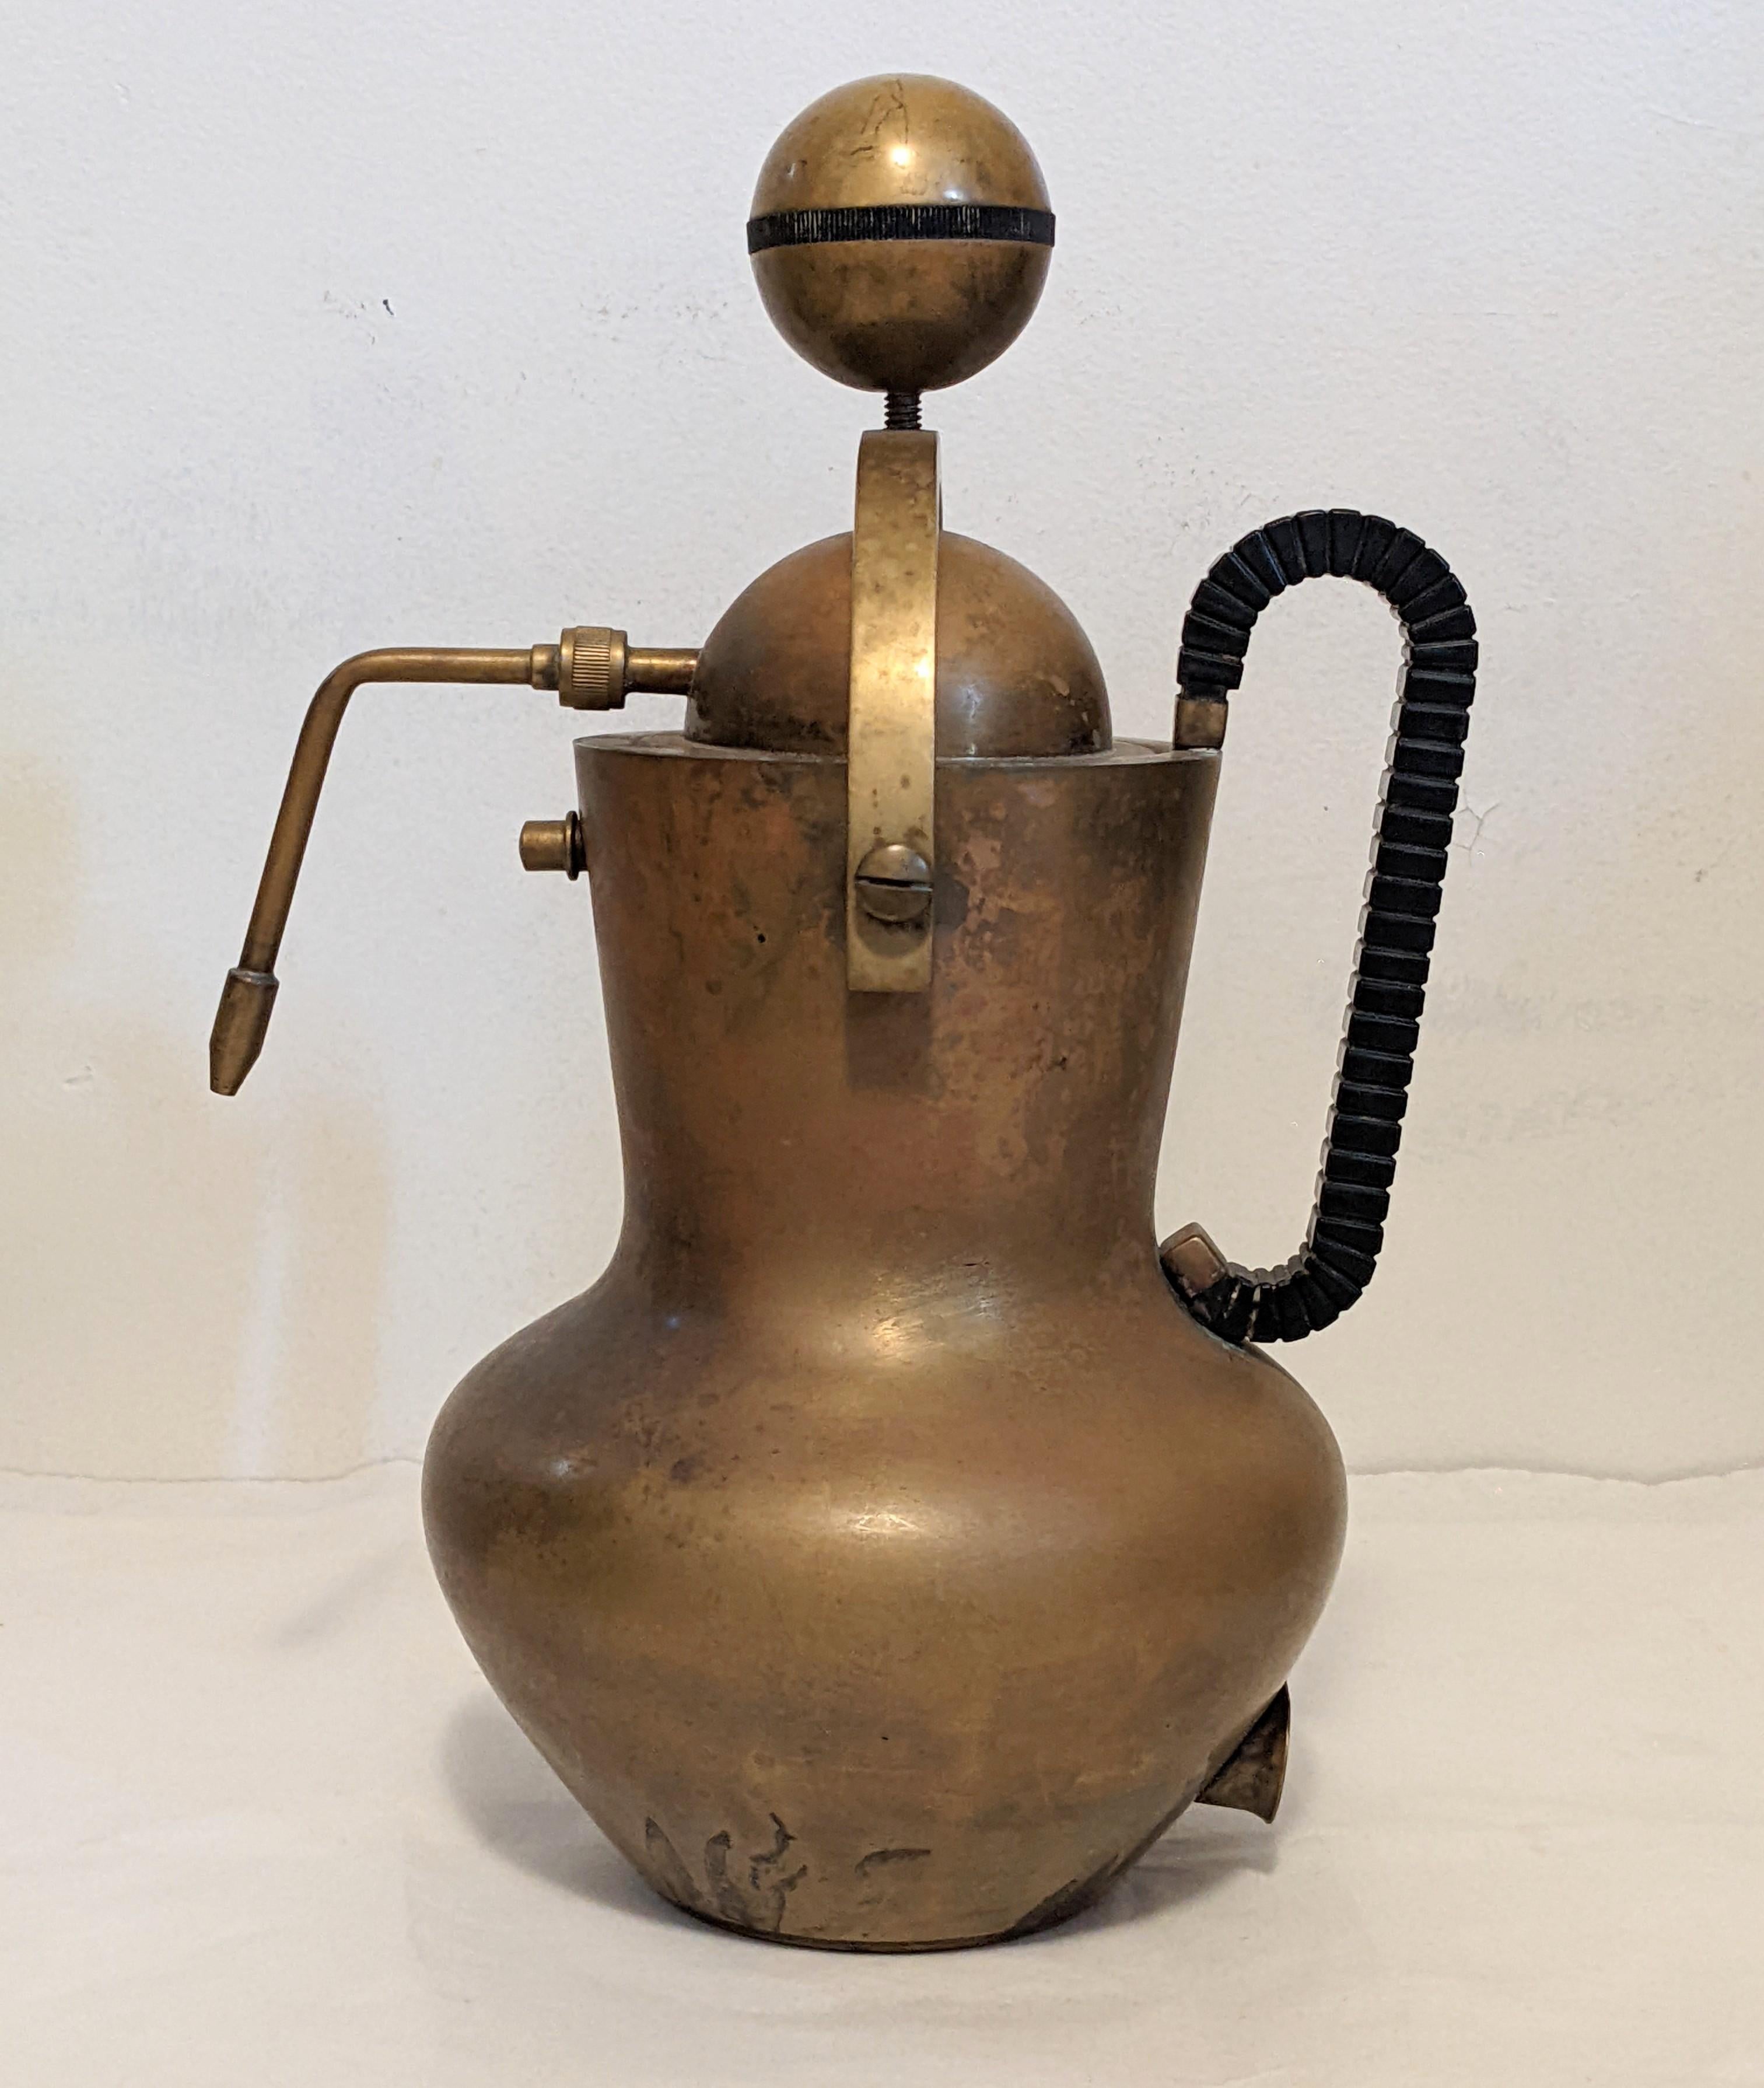 Sculptural mid-century Italian espresso maker from the 1940's. Incredible industrial design with fluted bakelite handle and accents. To open, unscrew the ball and it will swivel open as shown. Not intended for use, as it does have electrical